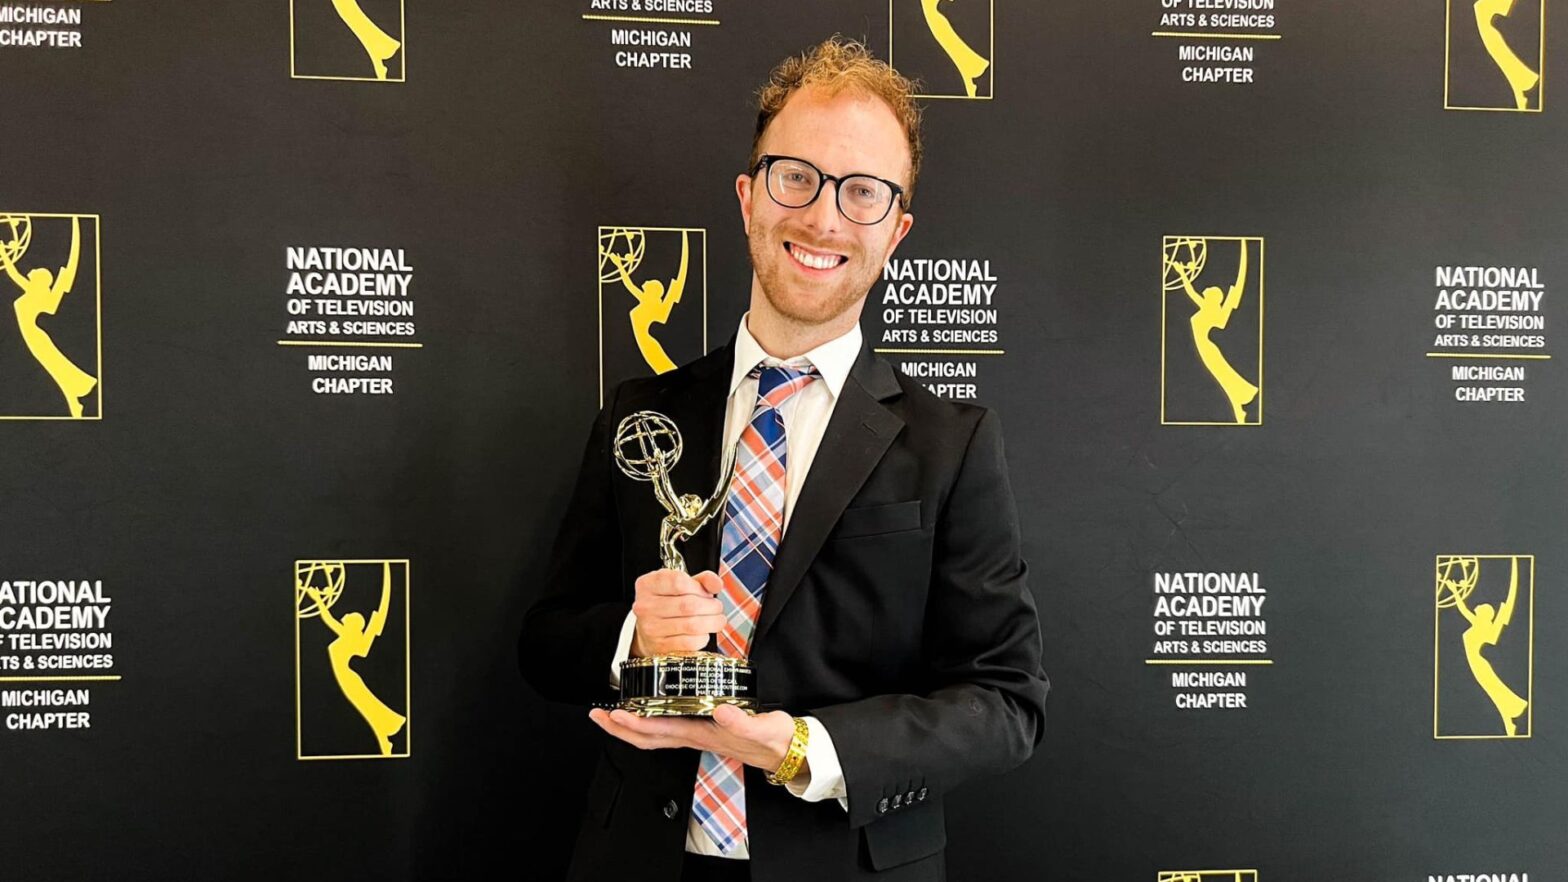 Riedl with his Emmy Award for his "Portraits of the Call" video project with the Diocese of Lansing in Michigan.